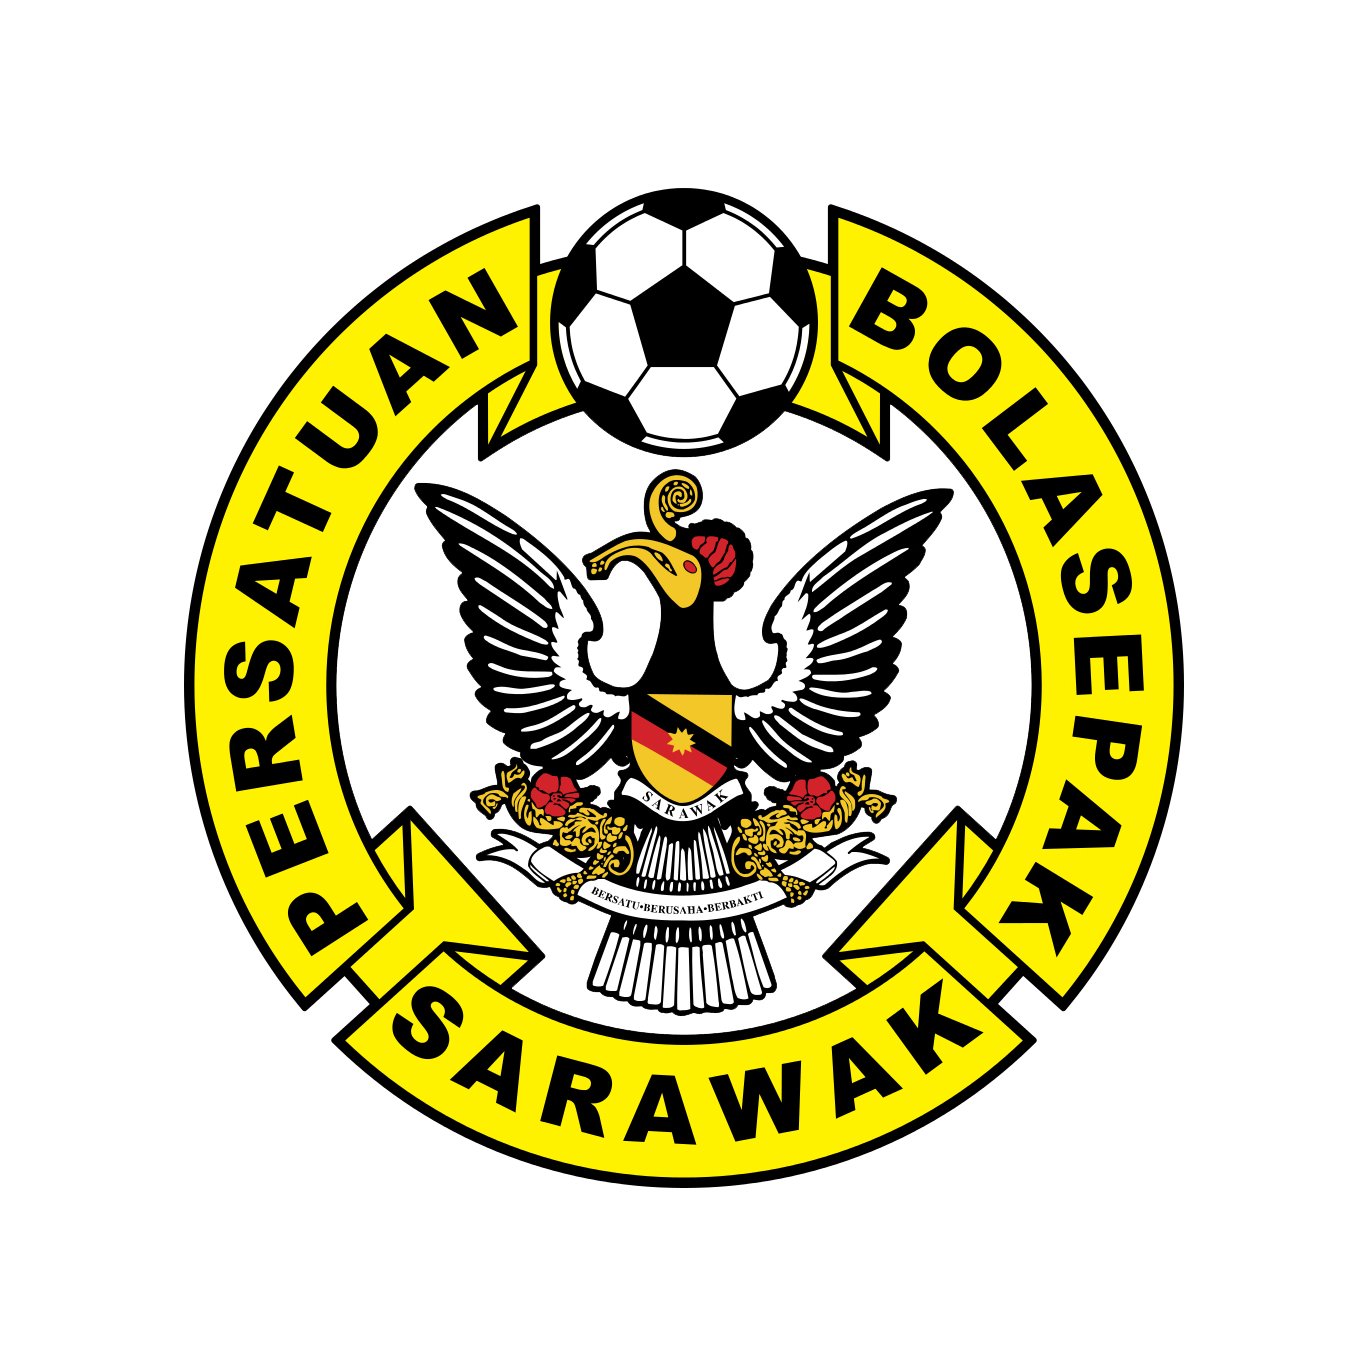 This is the official twitter account of Sarawak FA with the objective to provide up-to-date news and development on Sarawak Football.